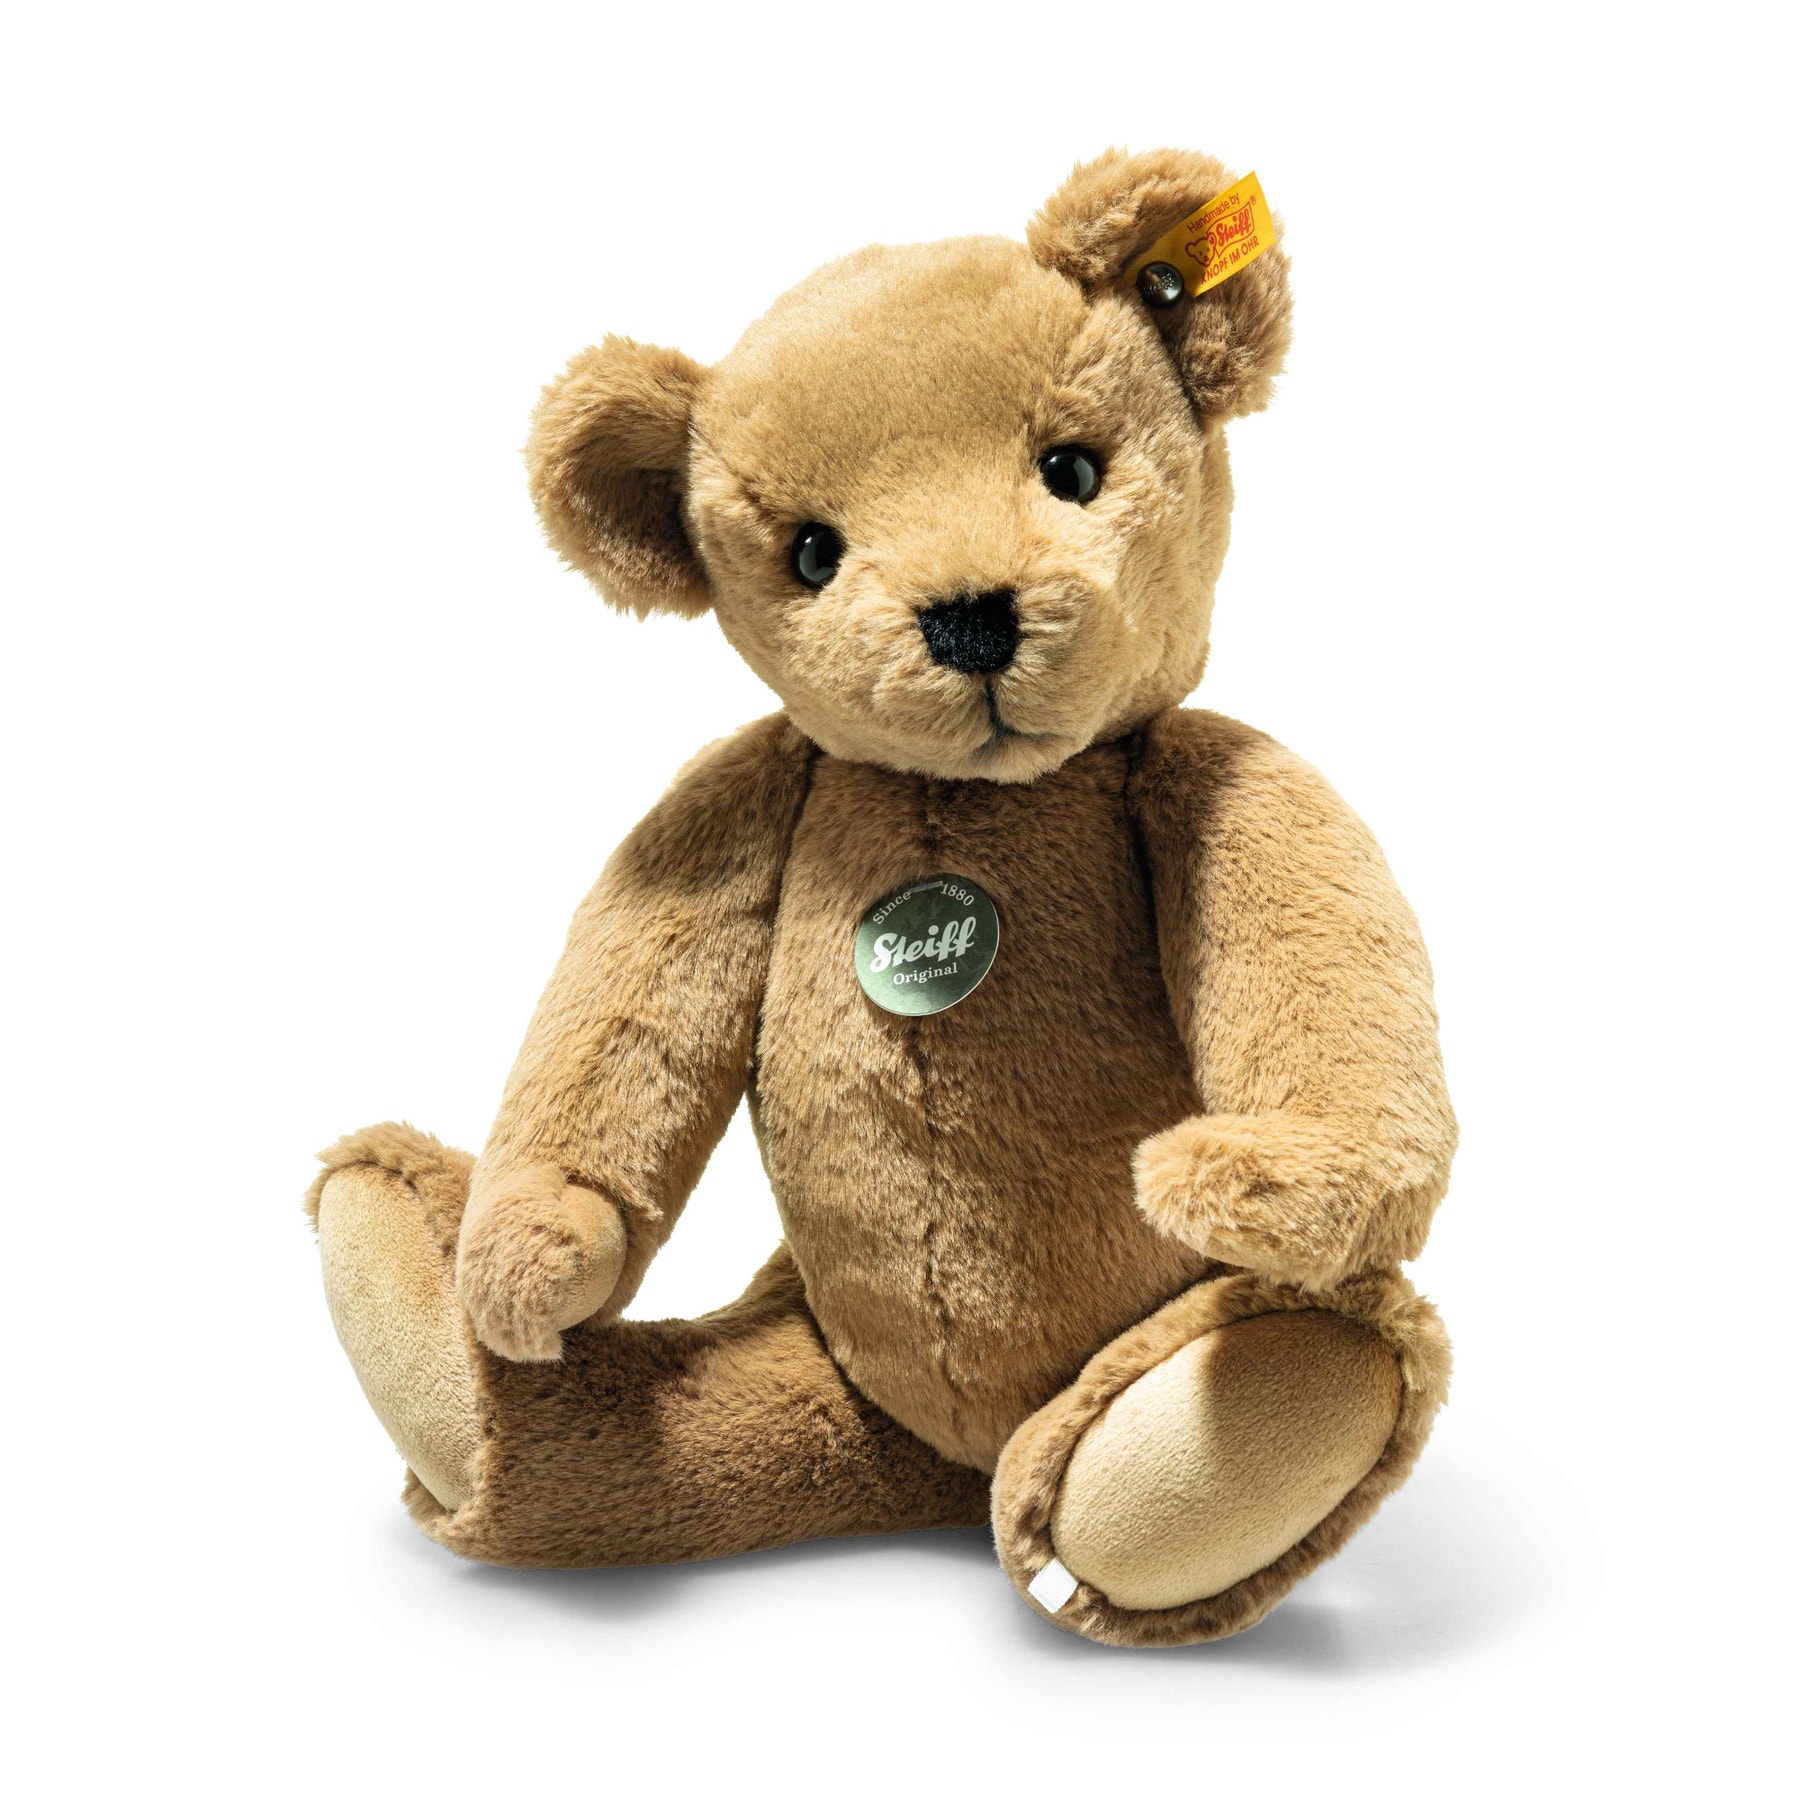 Ours Teddy Lio